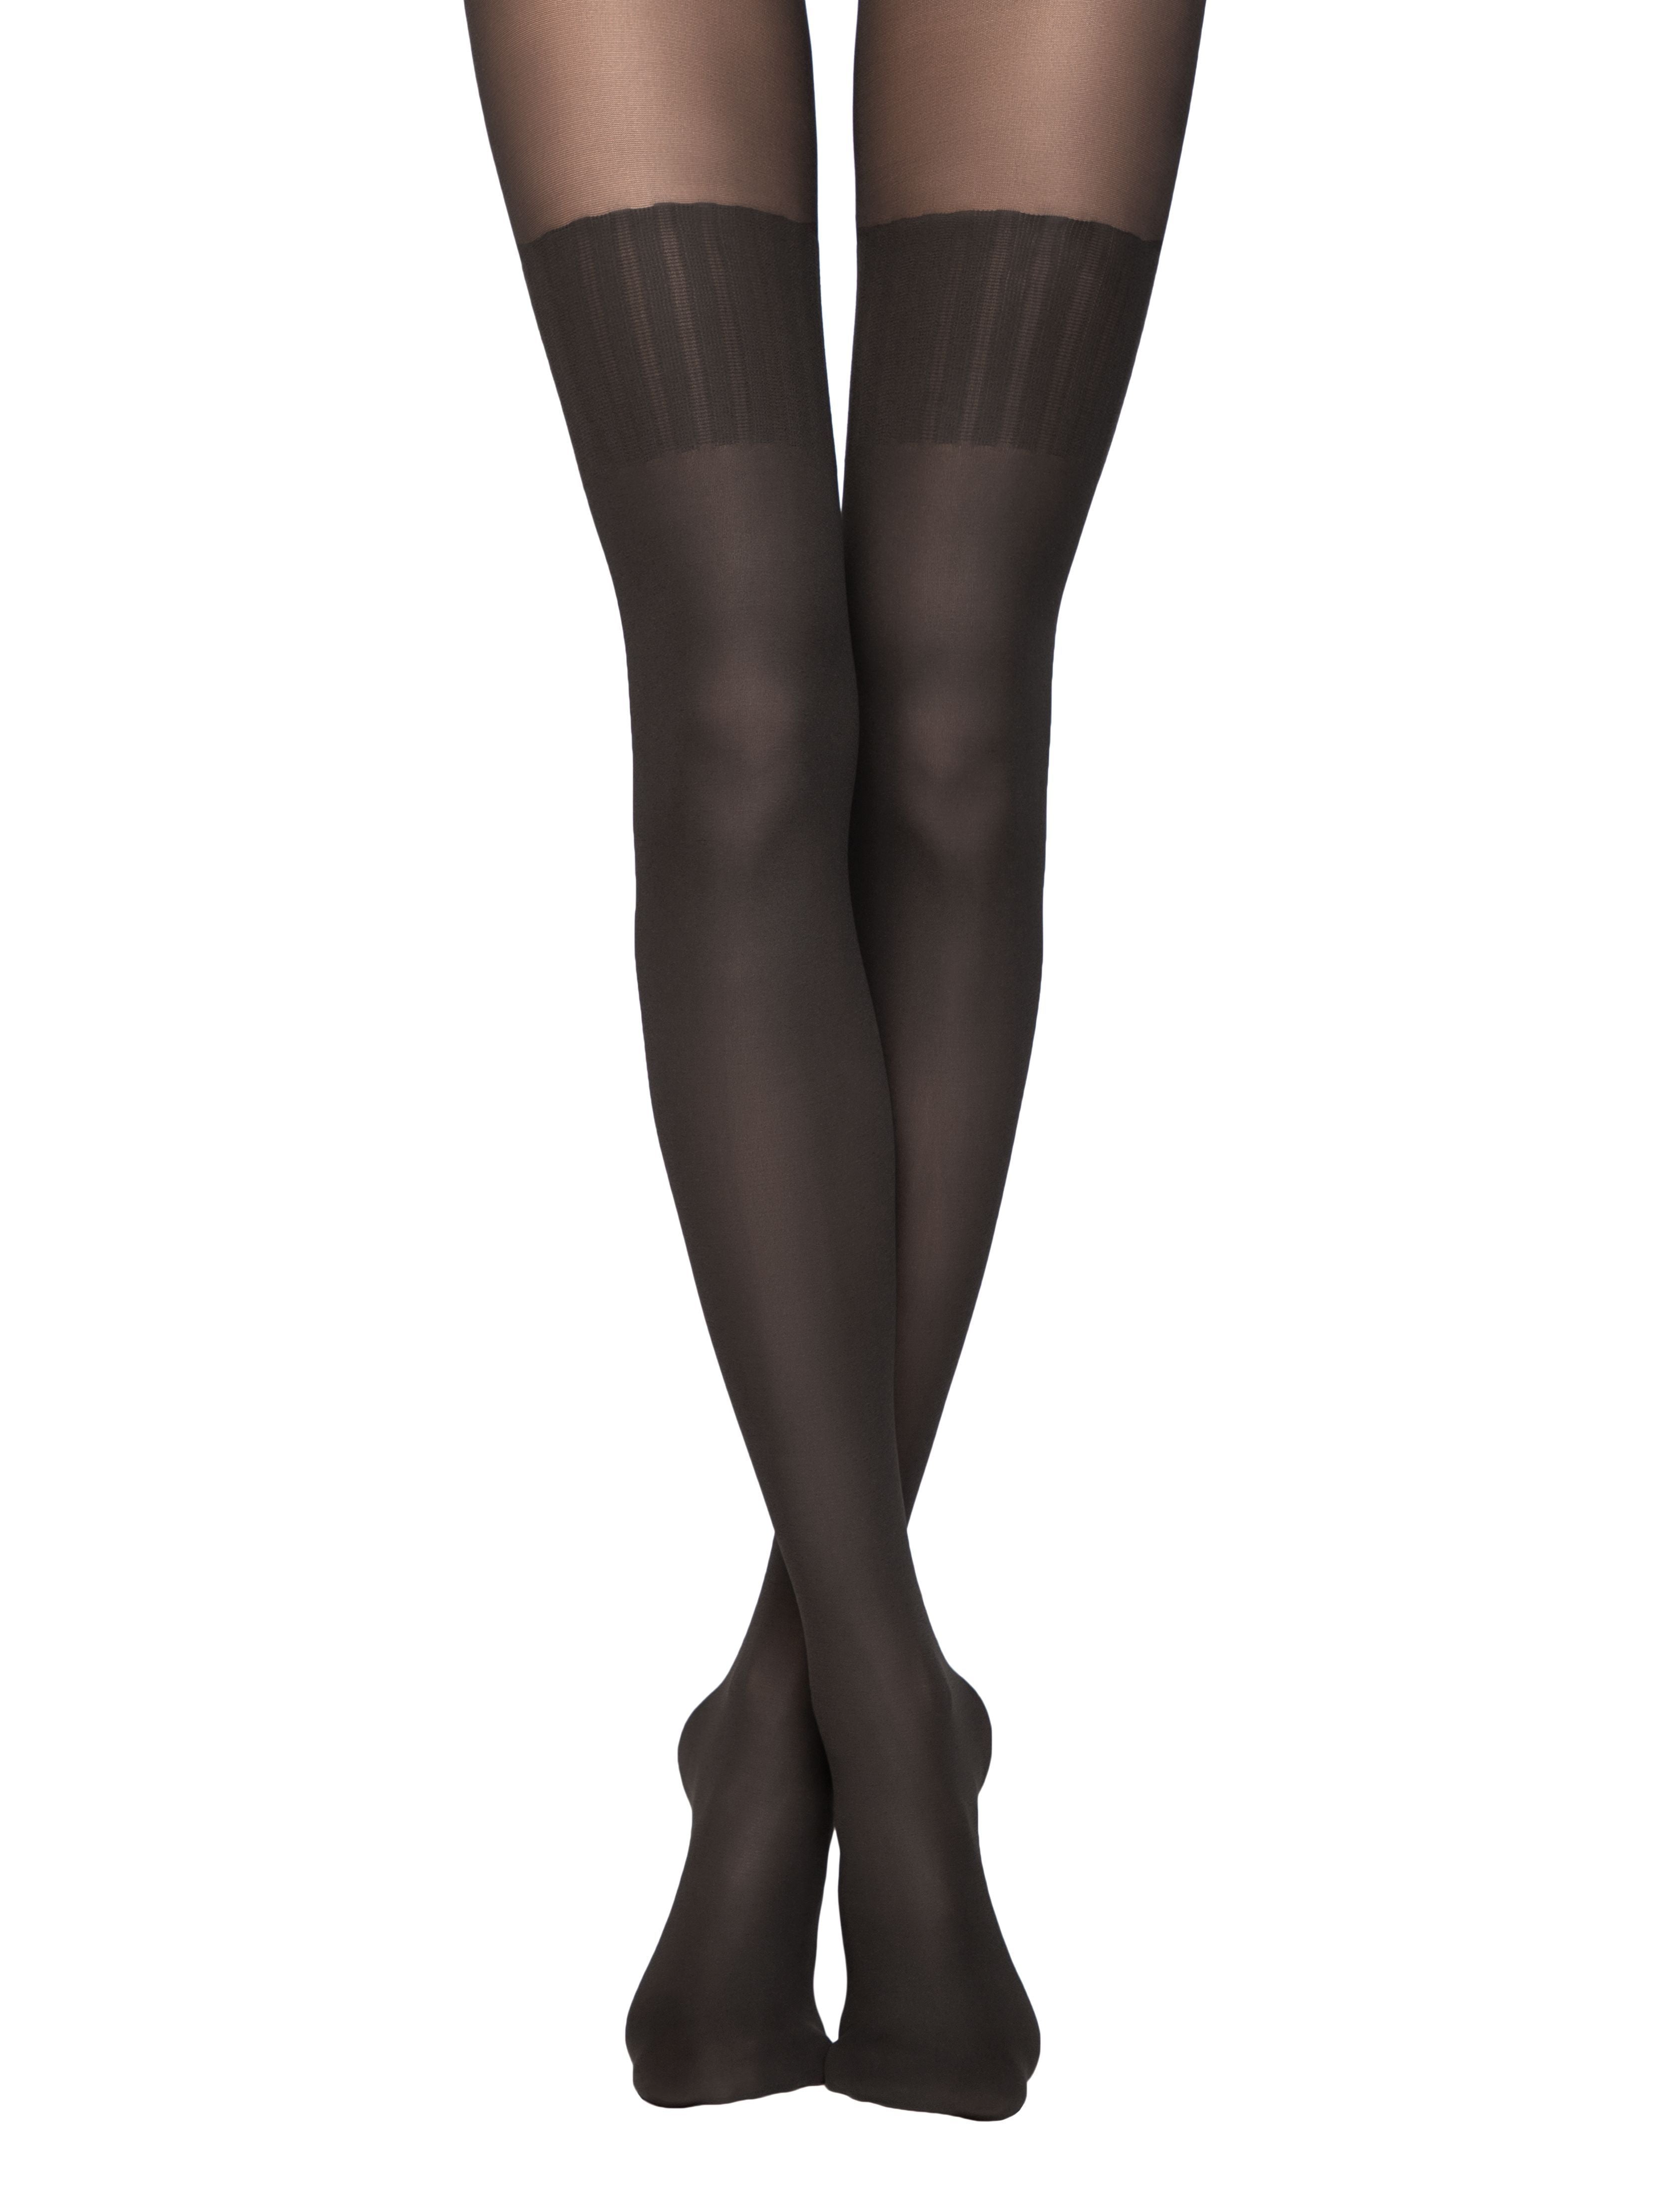 Opaque knee high black tights pantyhose with luxury opaque stockings Conte Elegant Erica